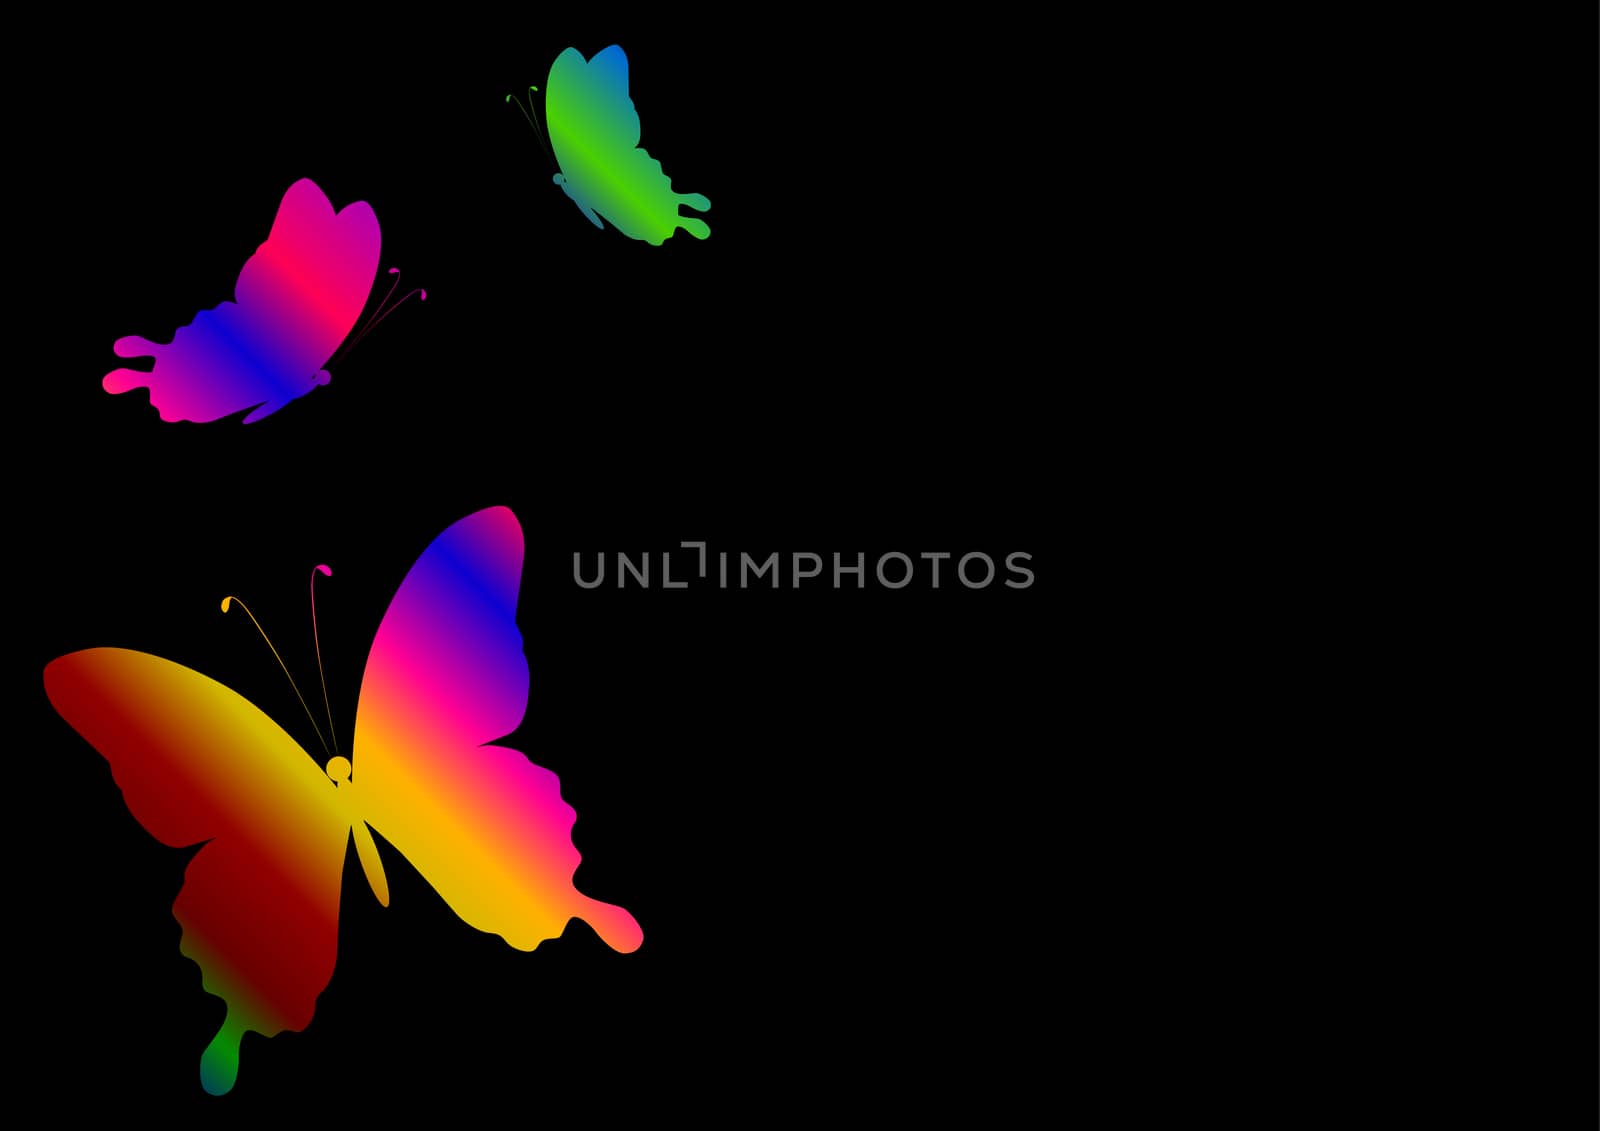 black background with a rainbow colored butterfly